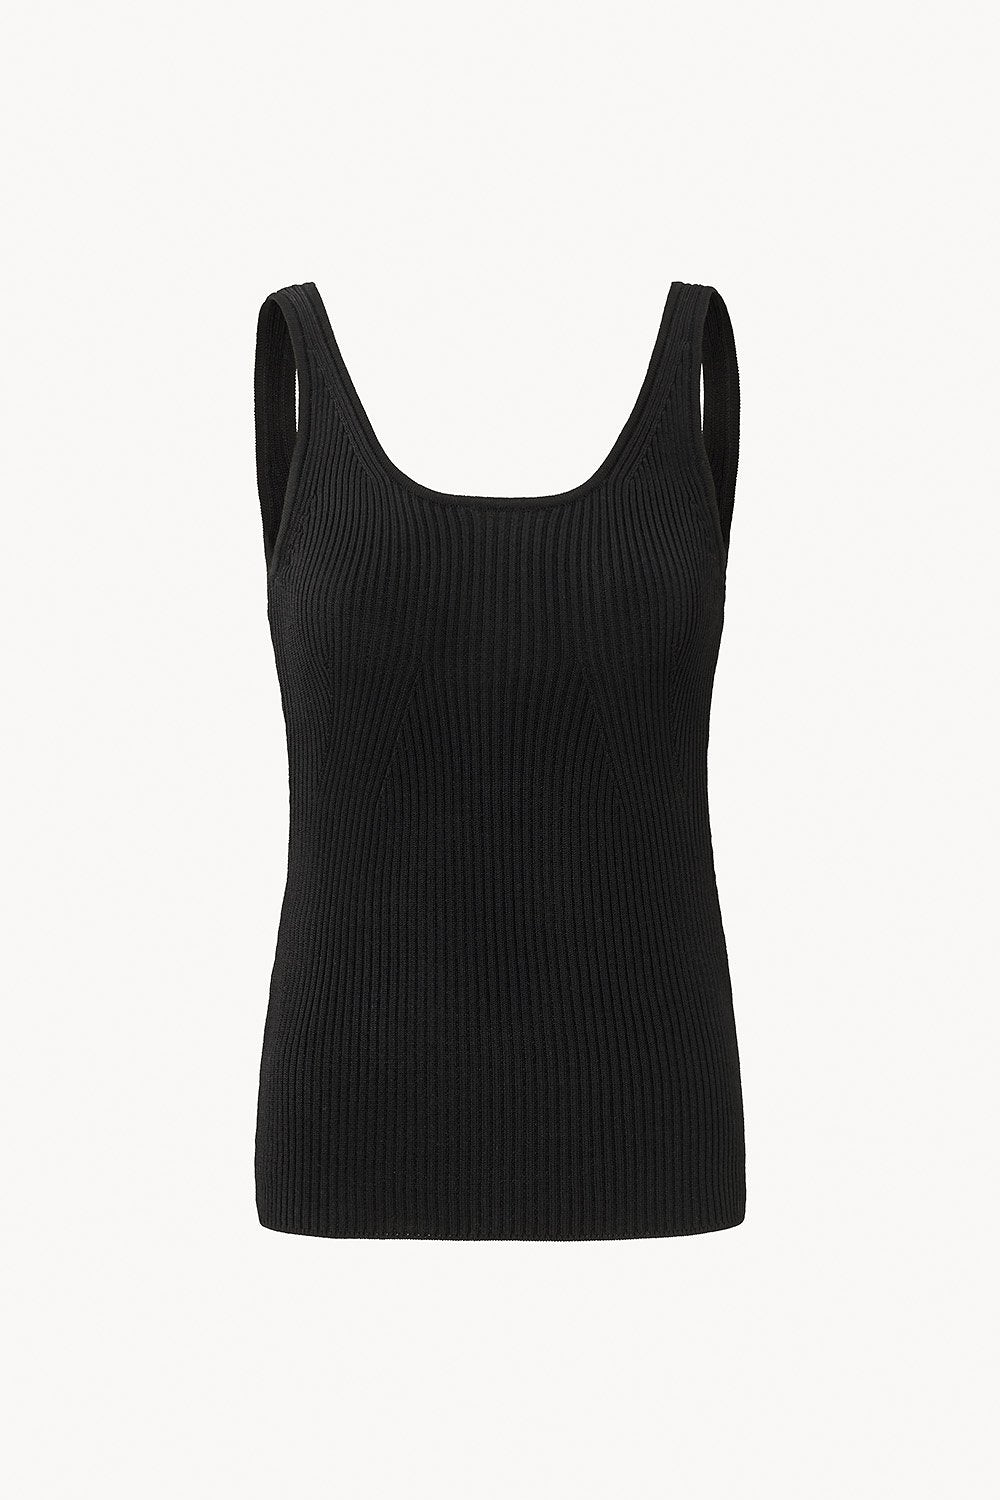 Public Figure Shop Ethical & Sustainable Fashion Sydney Australia  Caes 0008 ribbed knit top with square back